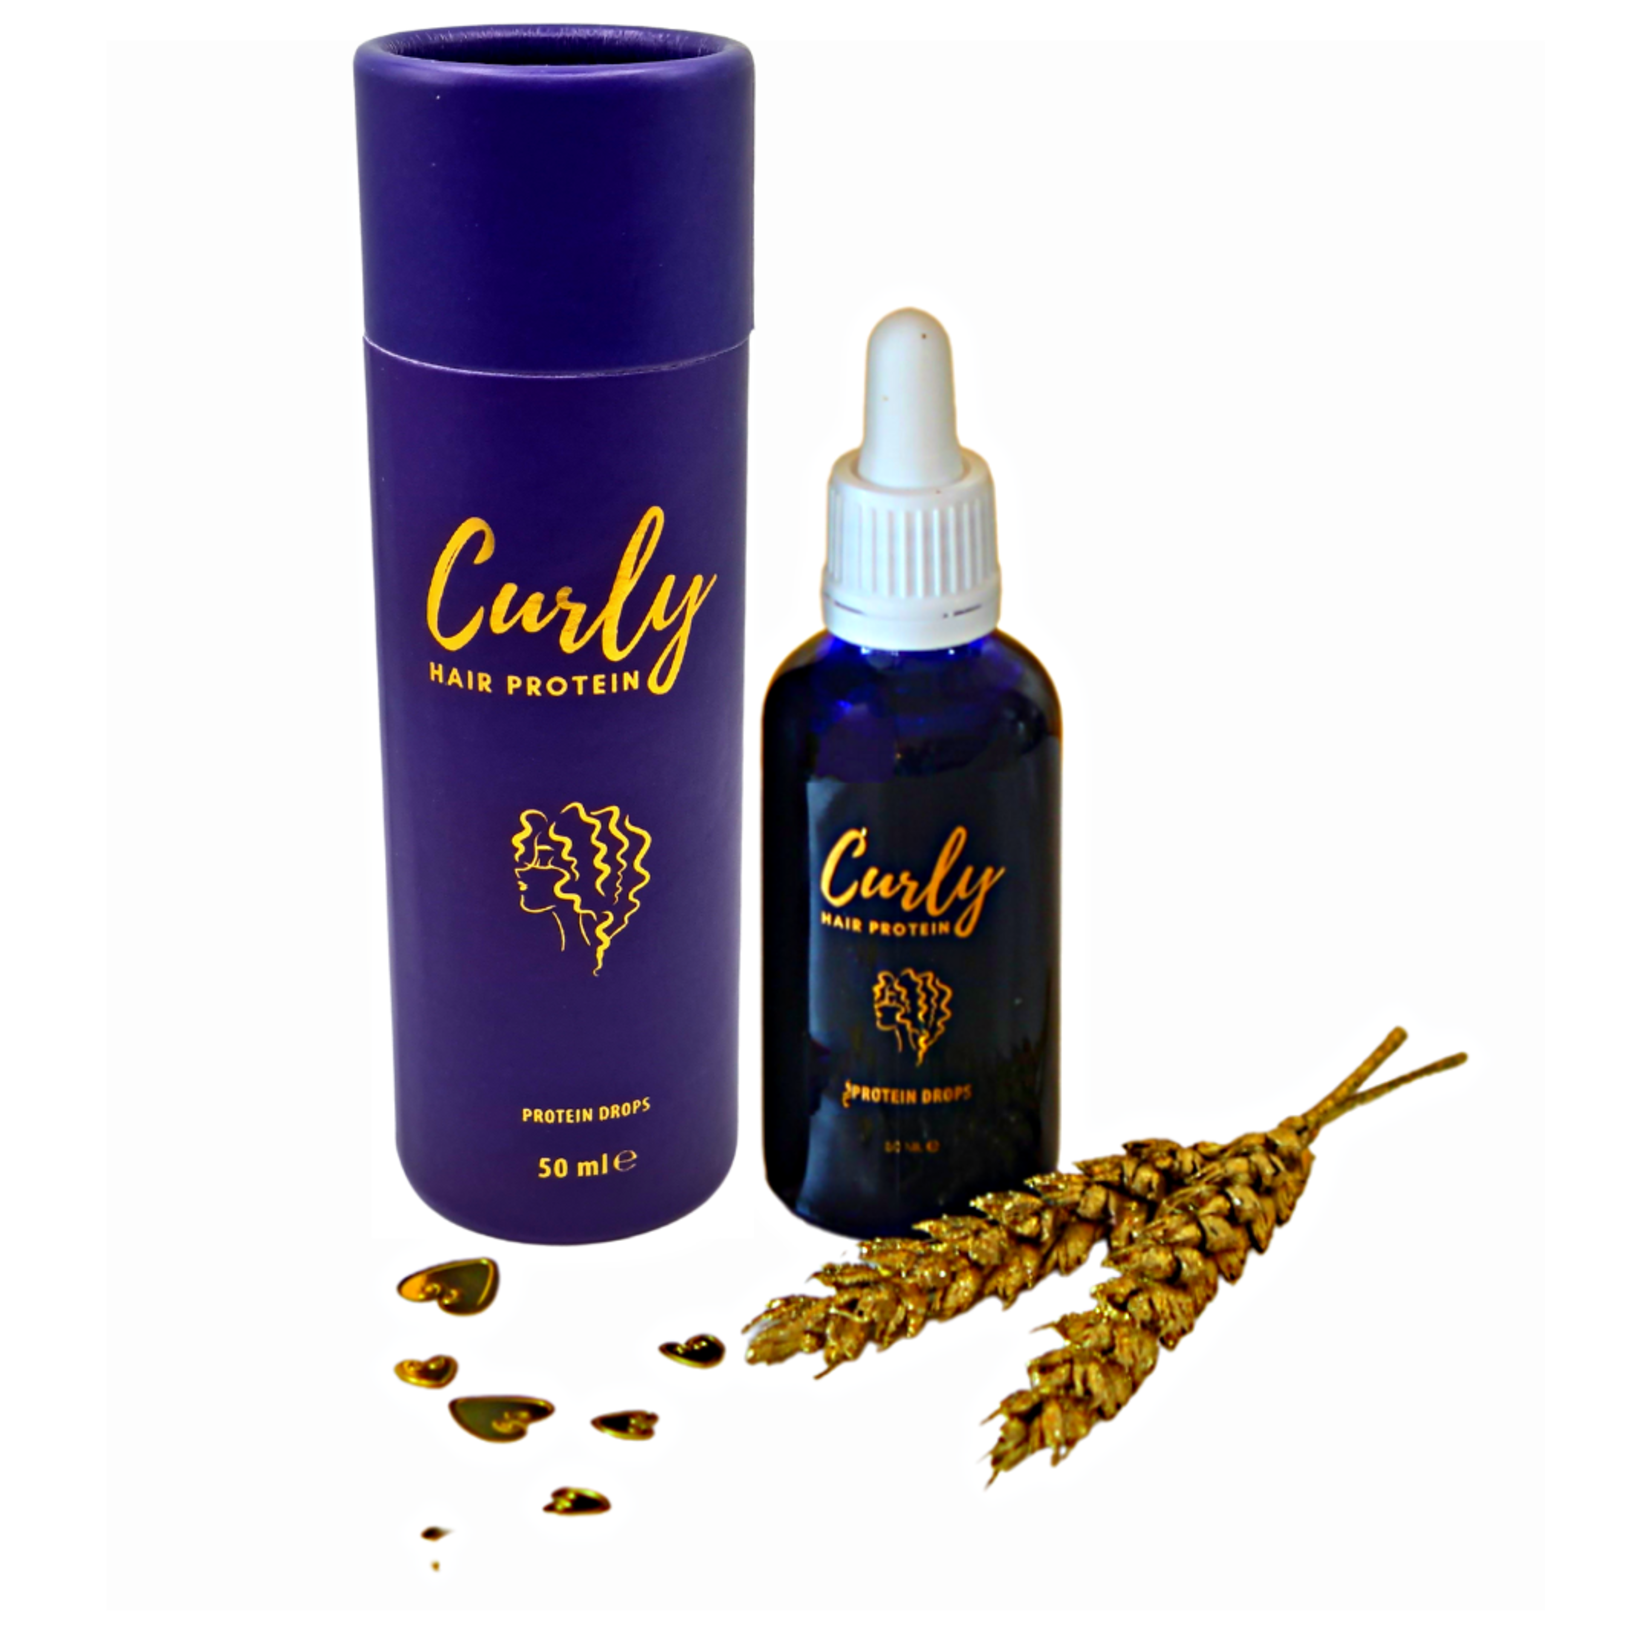 Curly Hair Protein, Protein Drops, 50 ml